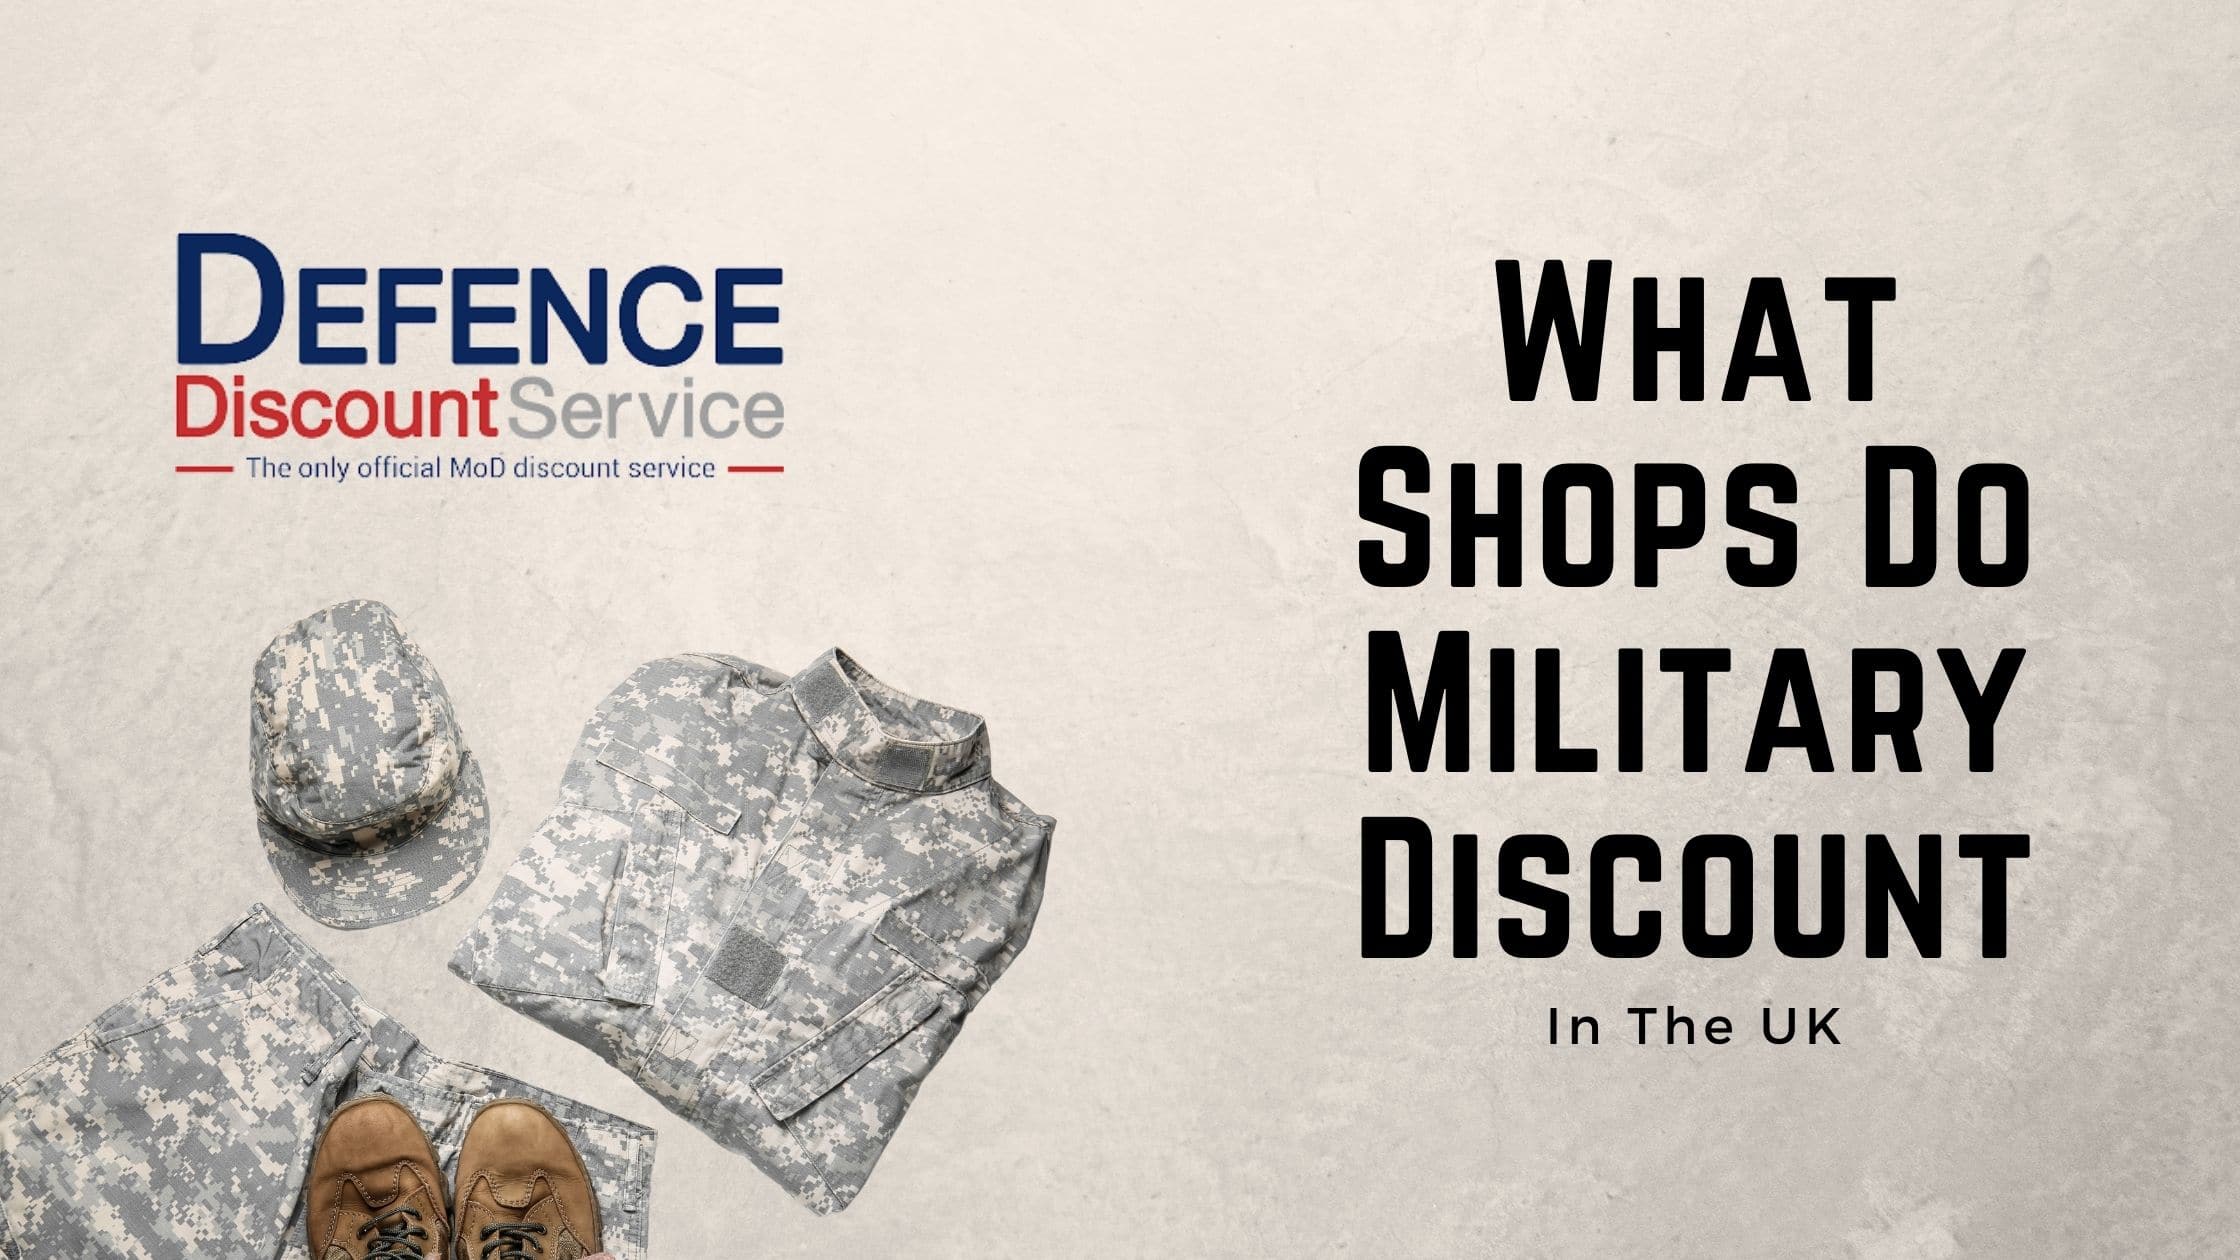 What Shops Do Military Discount in the UK